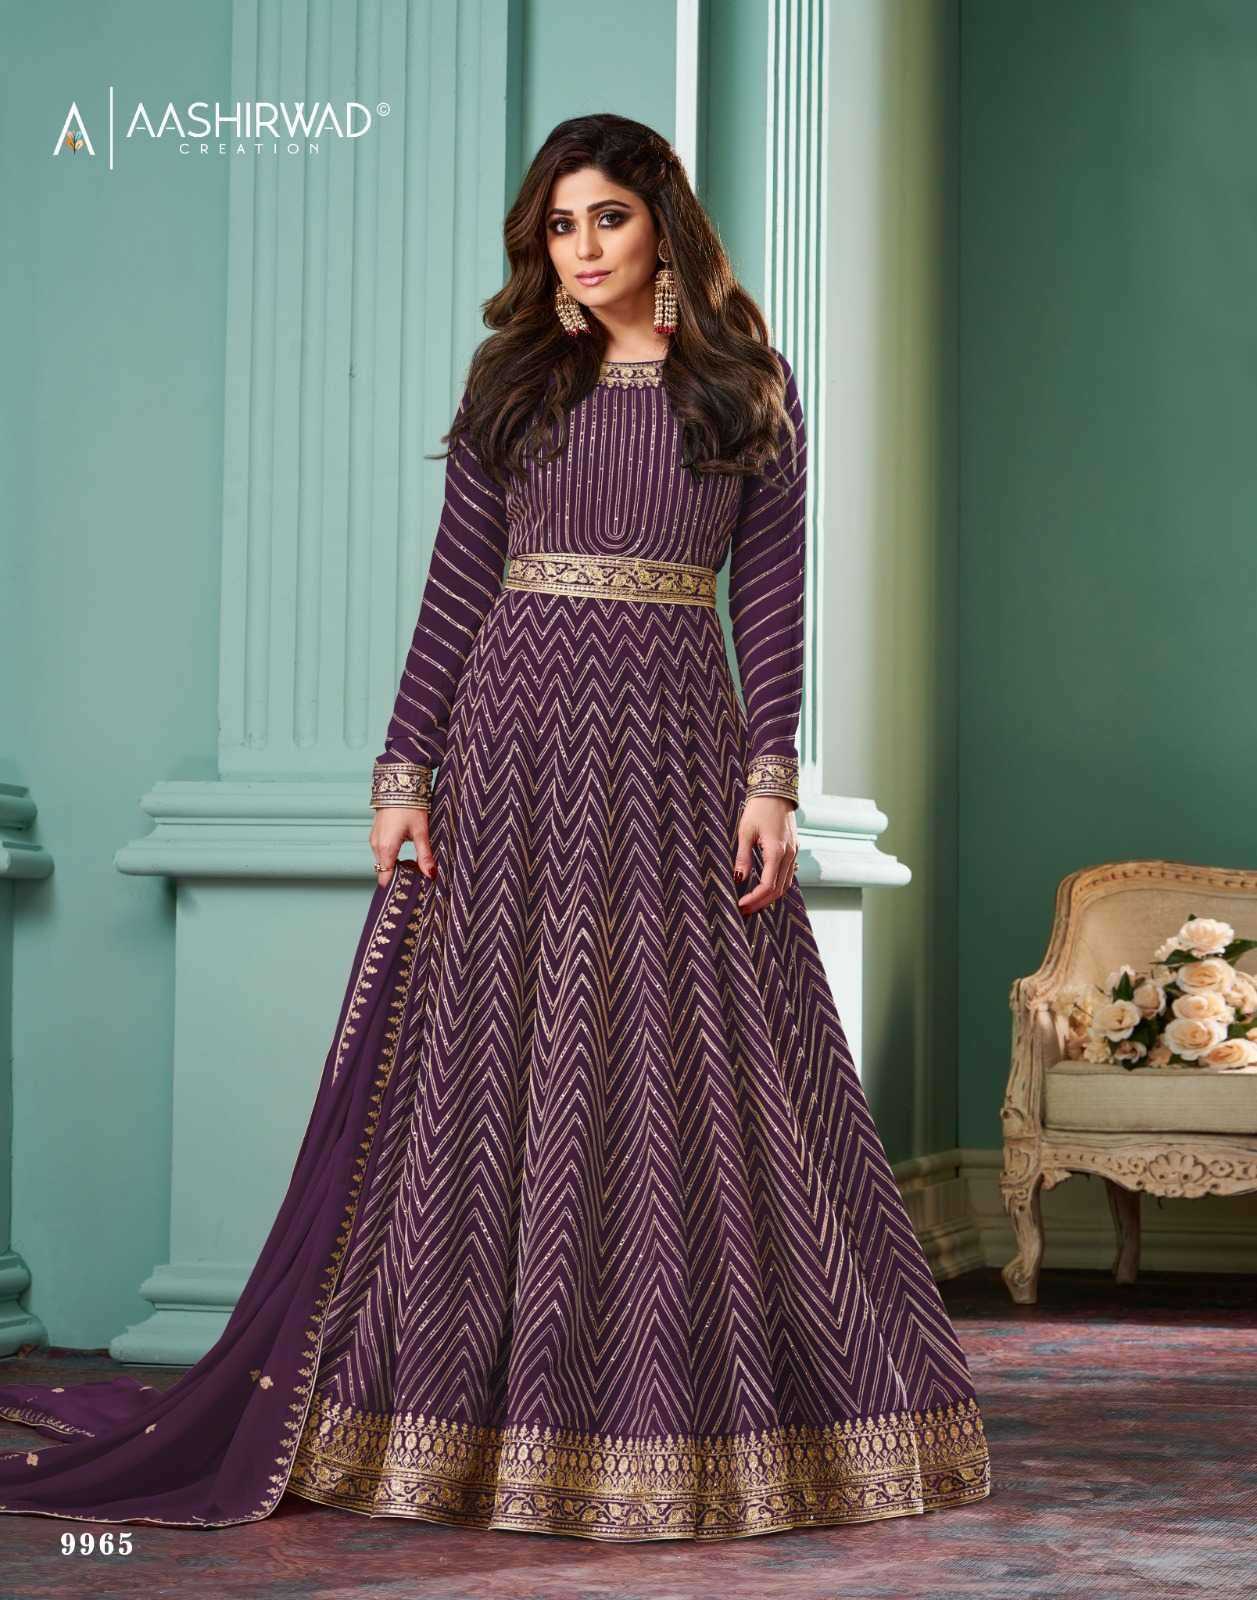 ALLIZA PRO READY TO PARTY WEAR DESIGNER 3 PIECE SUITS IN WHOLESALE RATE IN SURAT 